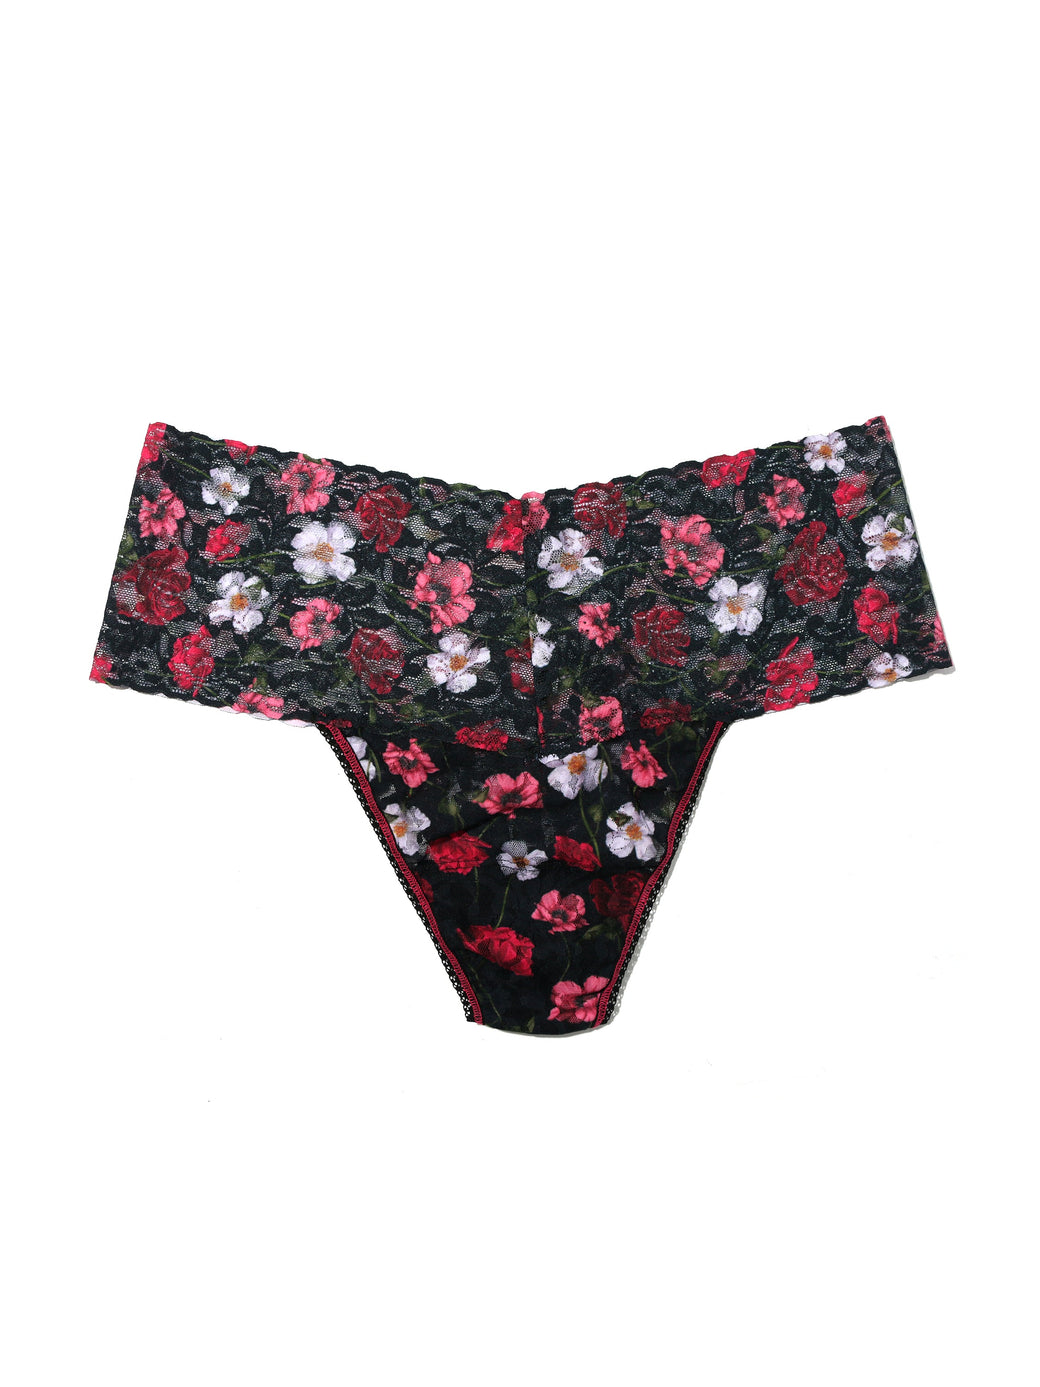 Hanky Panky Retro Thong Am I Dreaming in front view product image